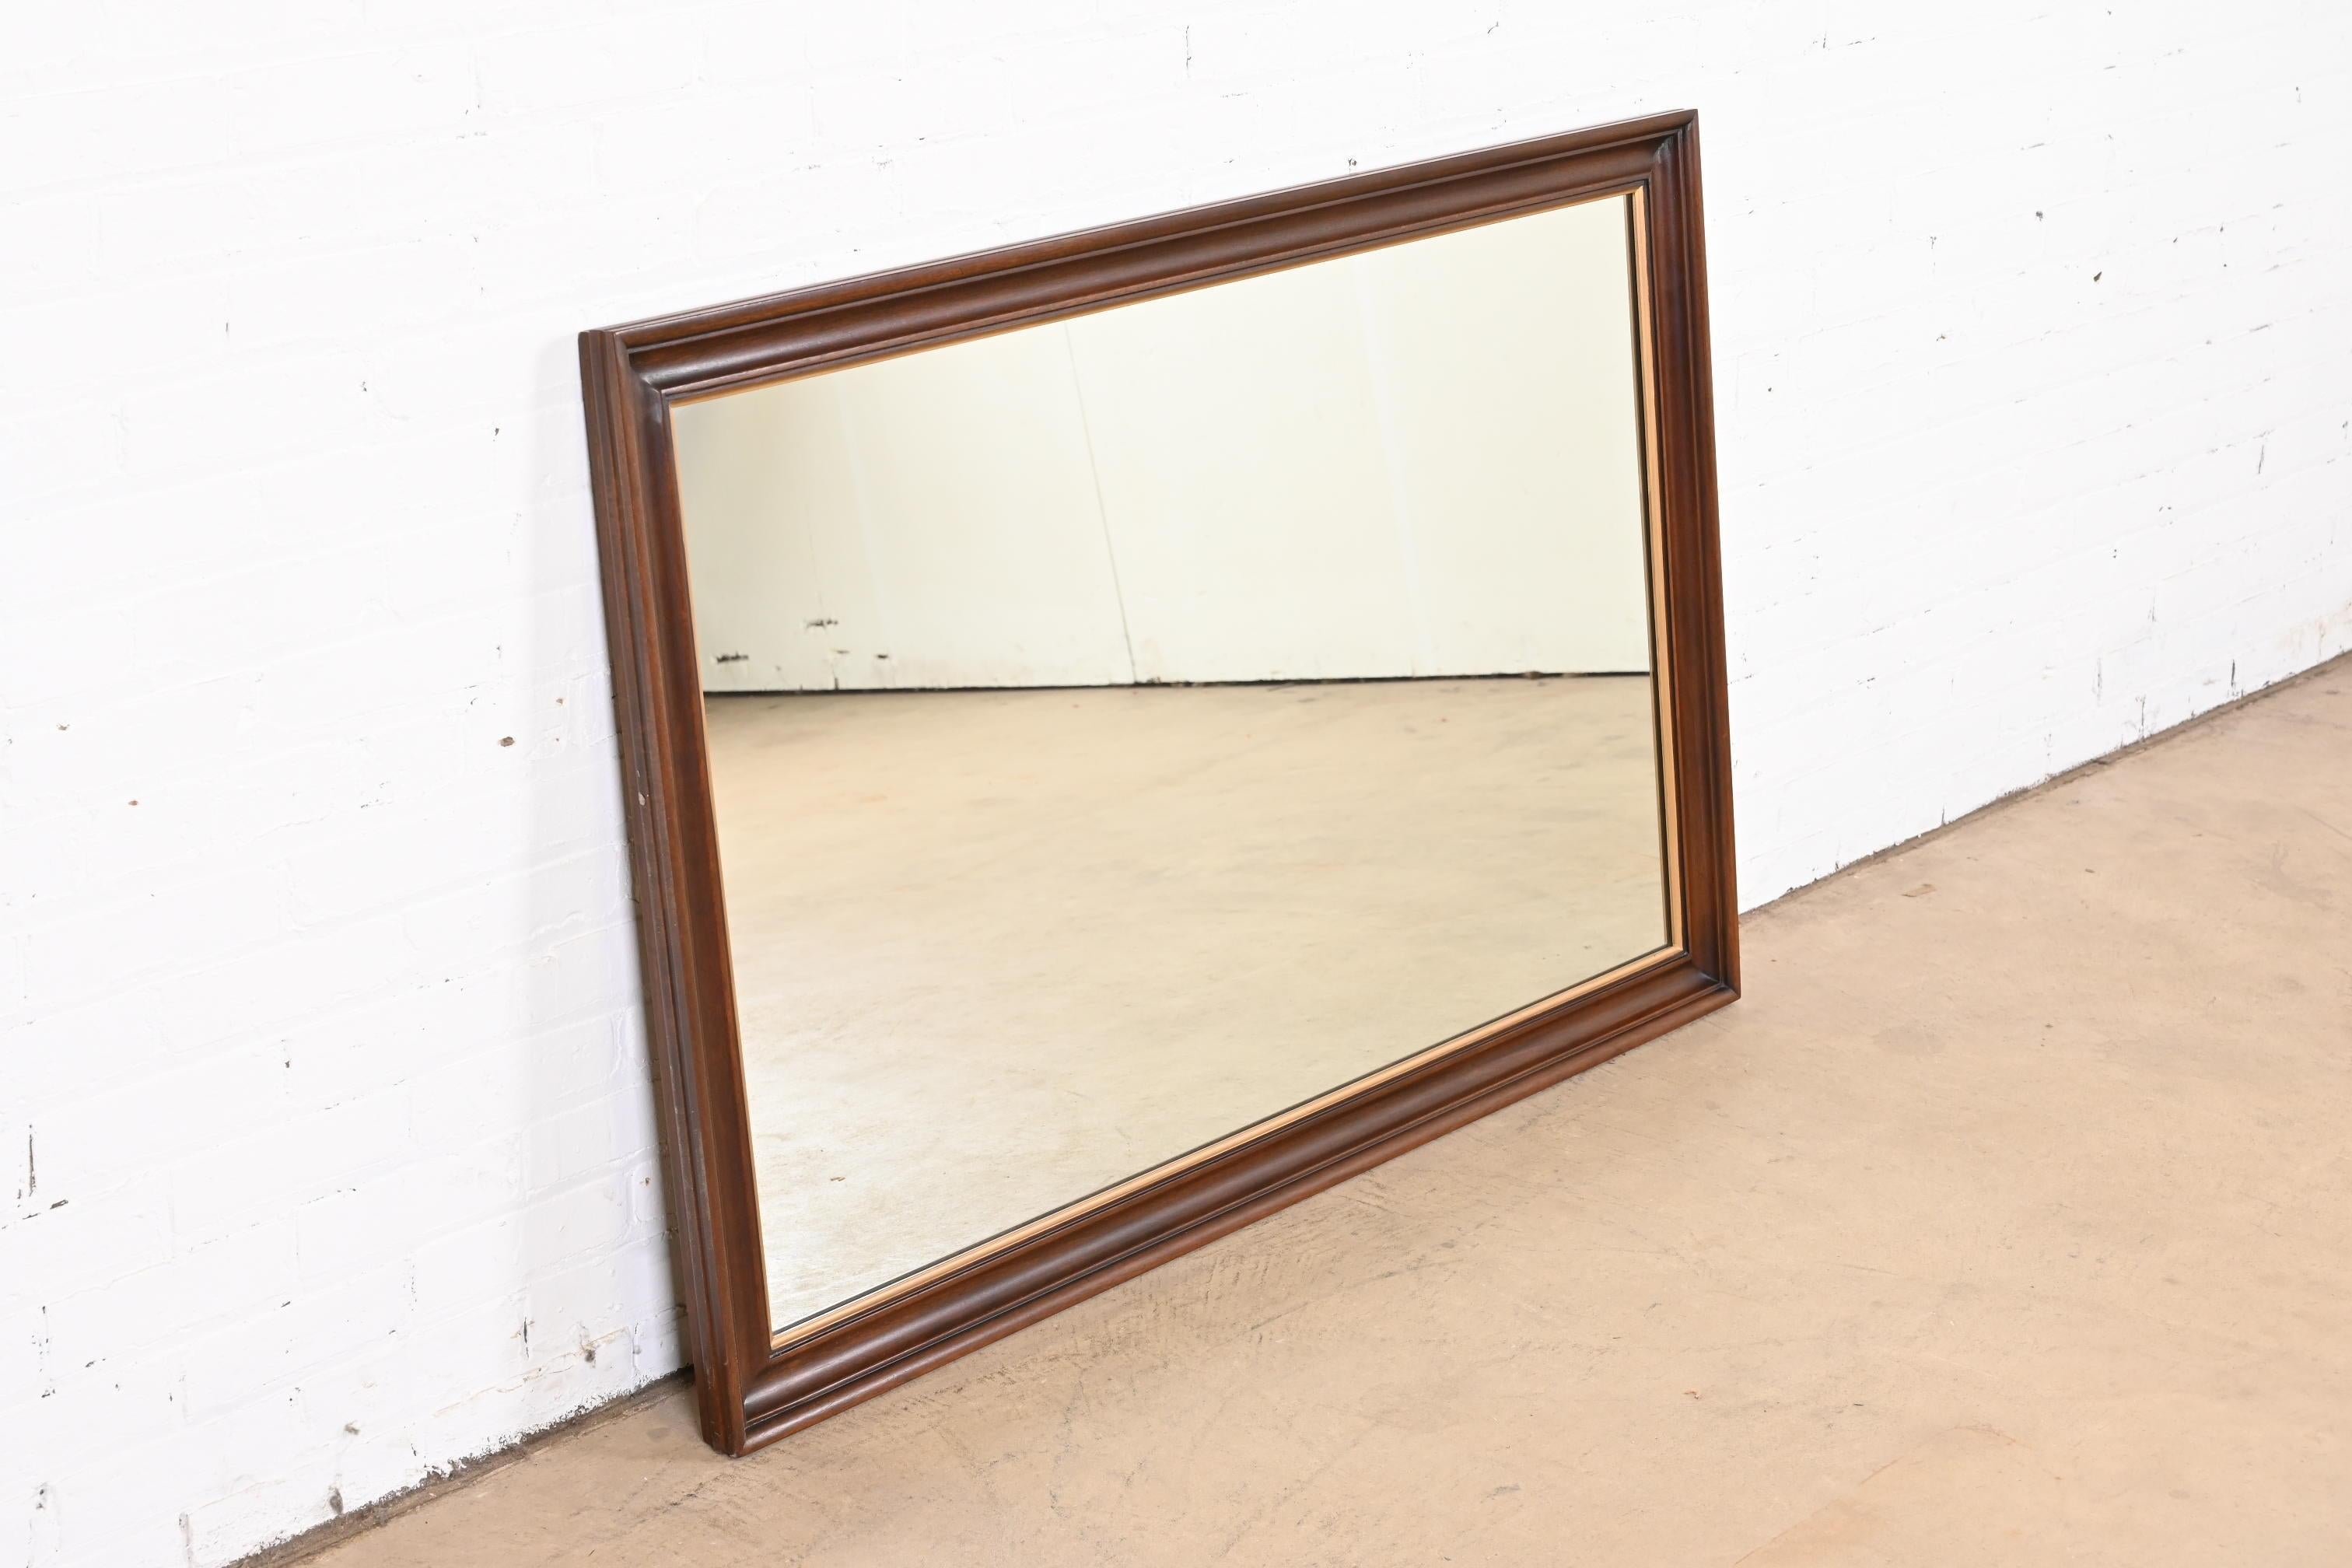 A beautiful traditional Regency style framed wall mirror

By Henkel Harris

USA, 1972

Carved solid mahogany, with gold gilt trim.

Measures: 52.5